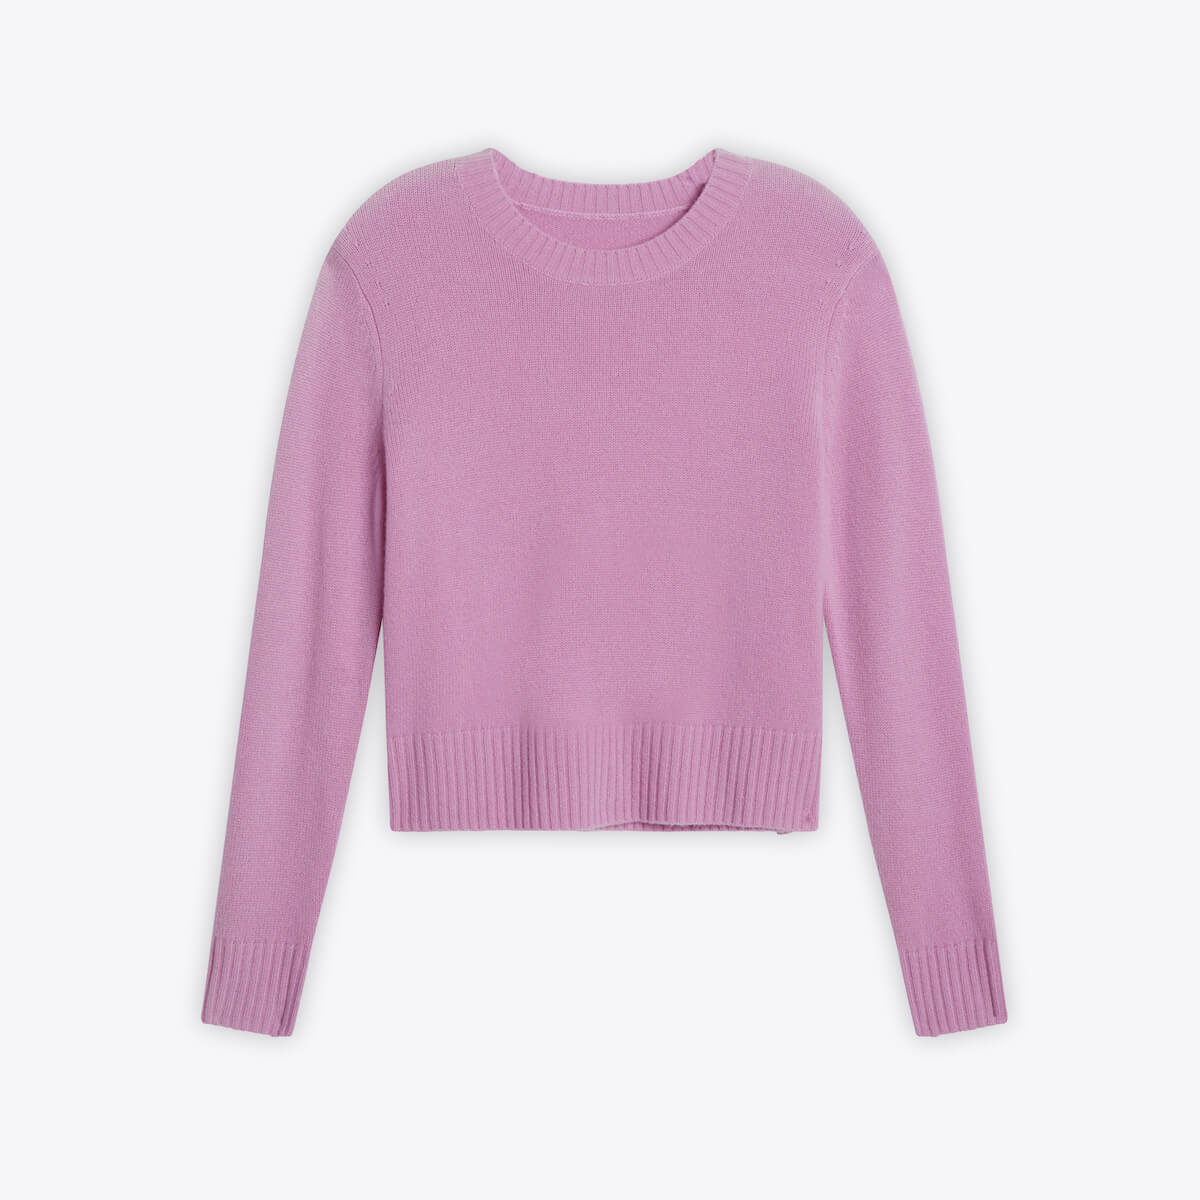 Product photo of a lilac pink boxy sweater